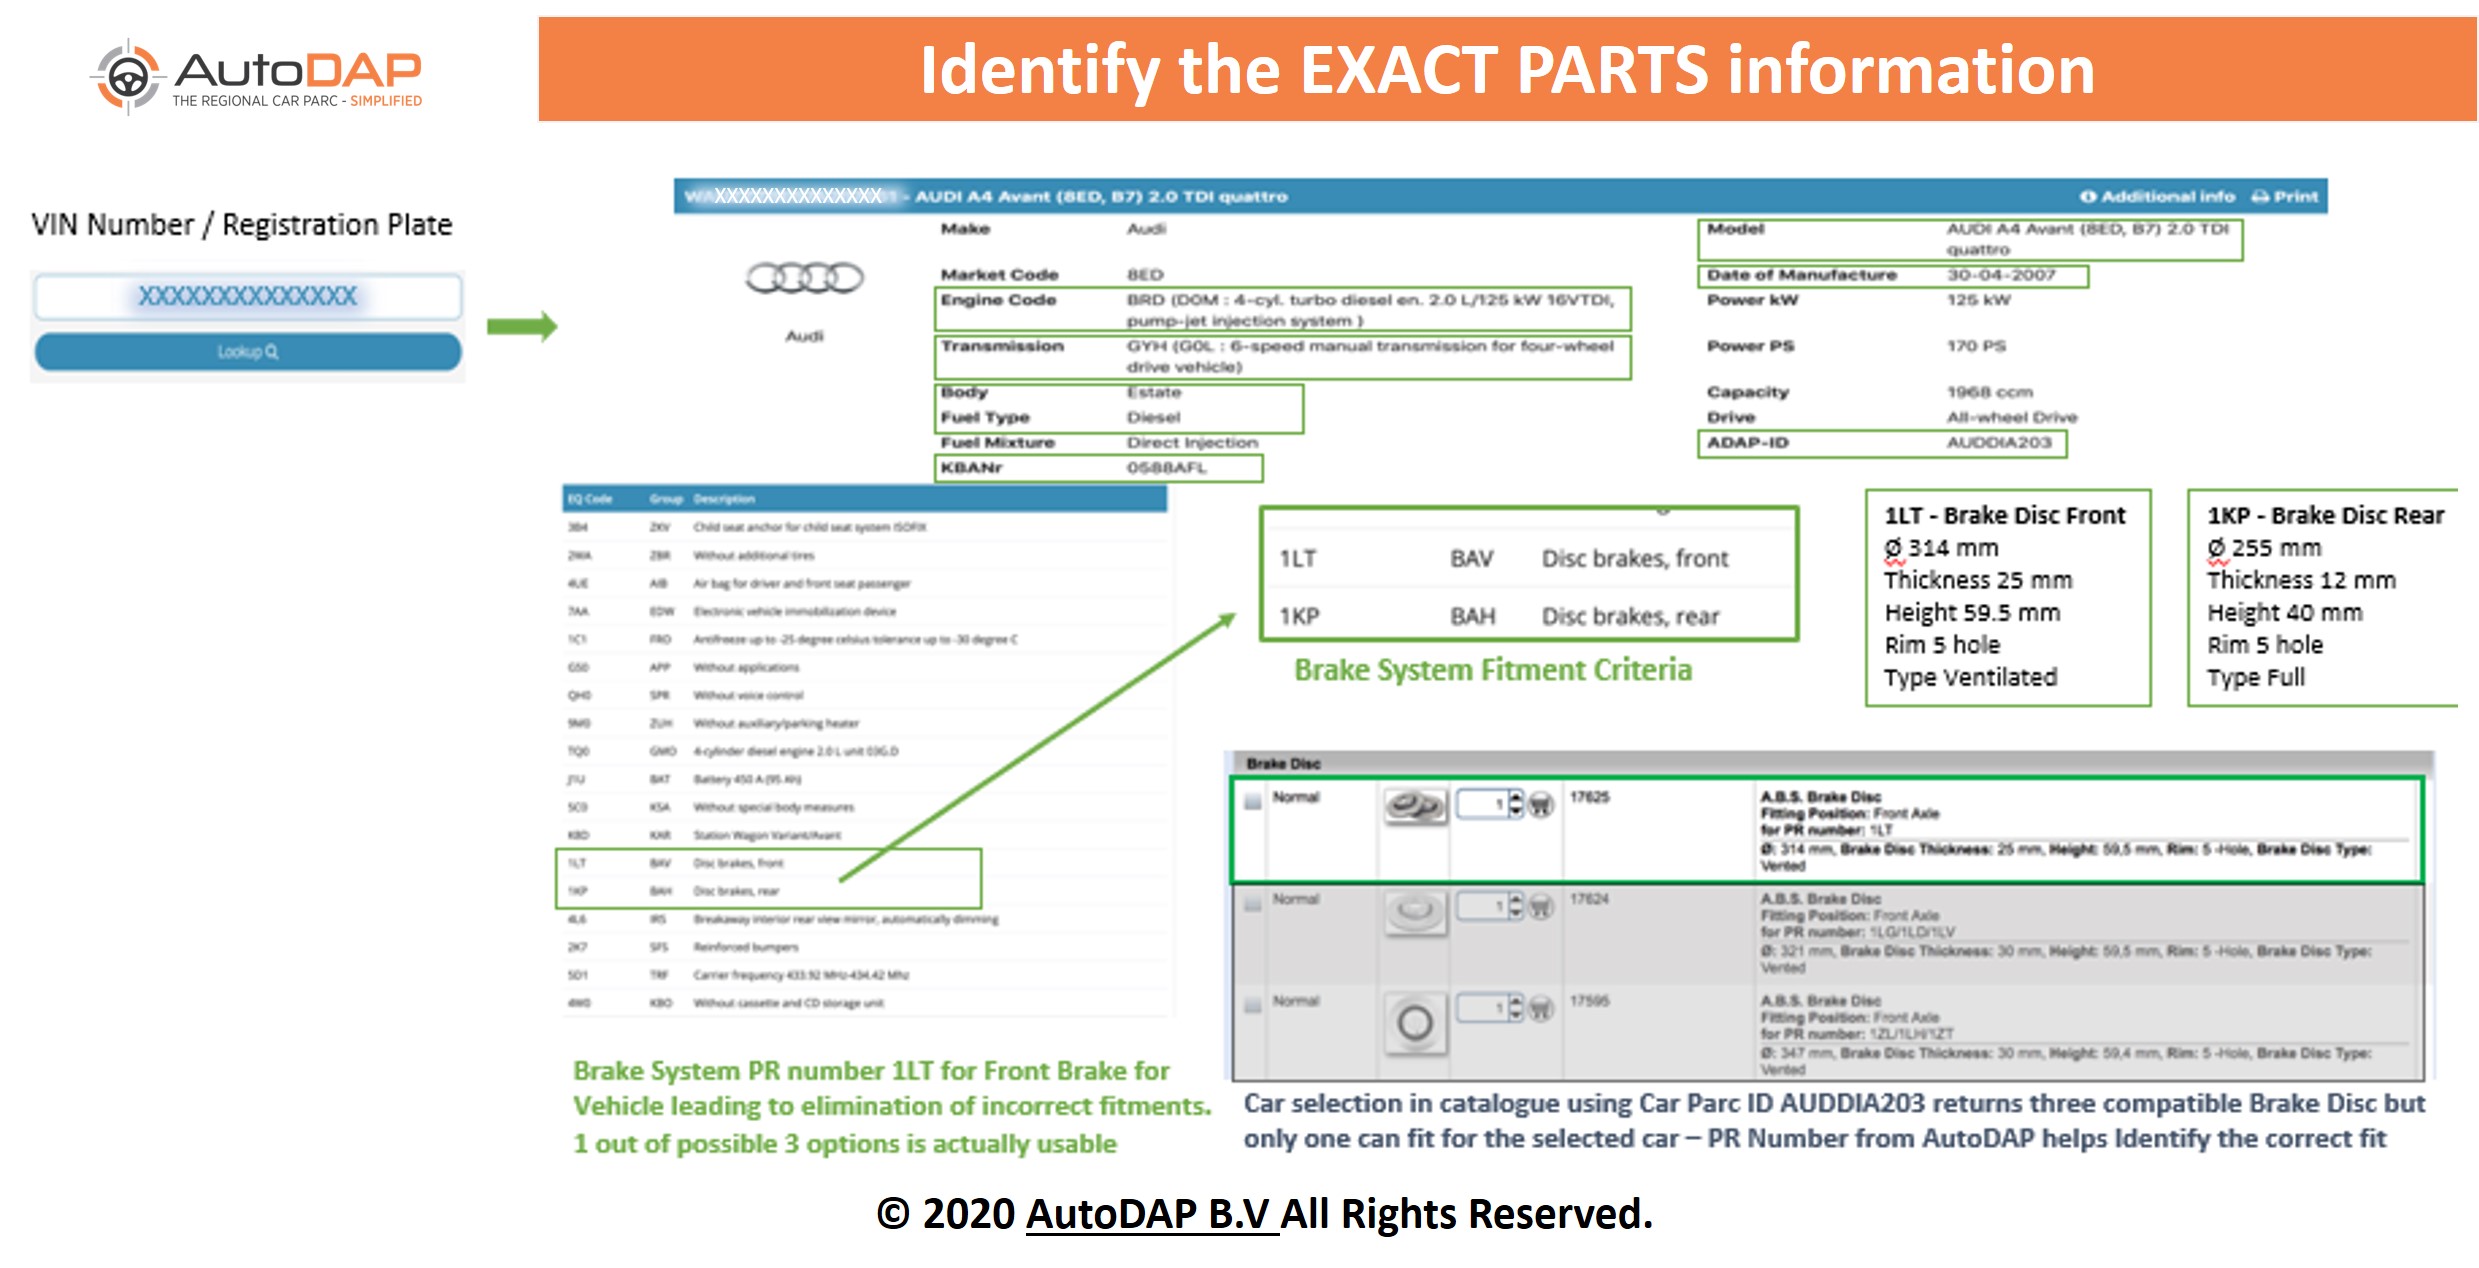 The Smart Way to get the VIN Precise Parts Information